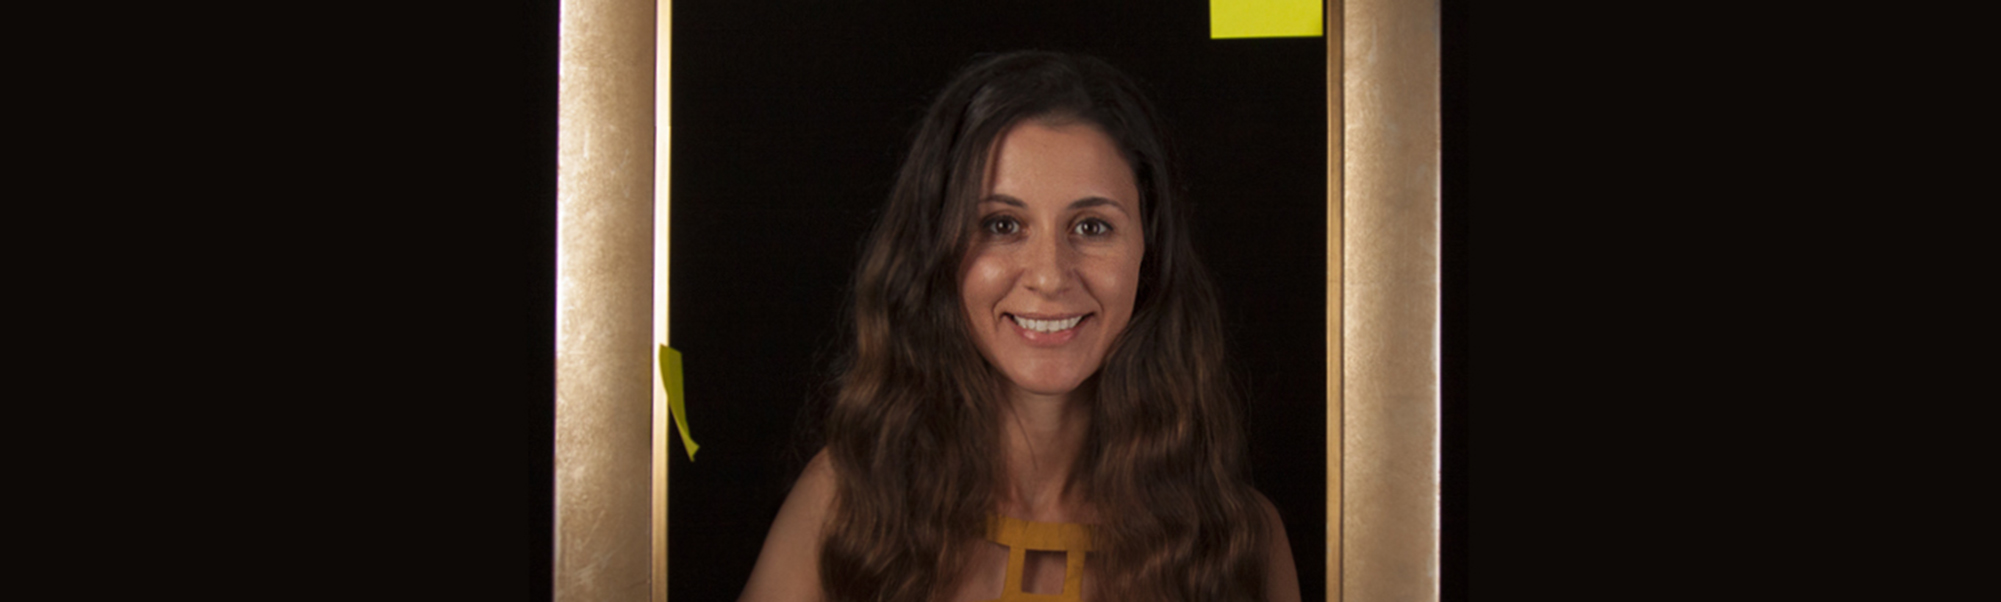 smiling woman standing inside a picture frame holding post-it notes.